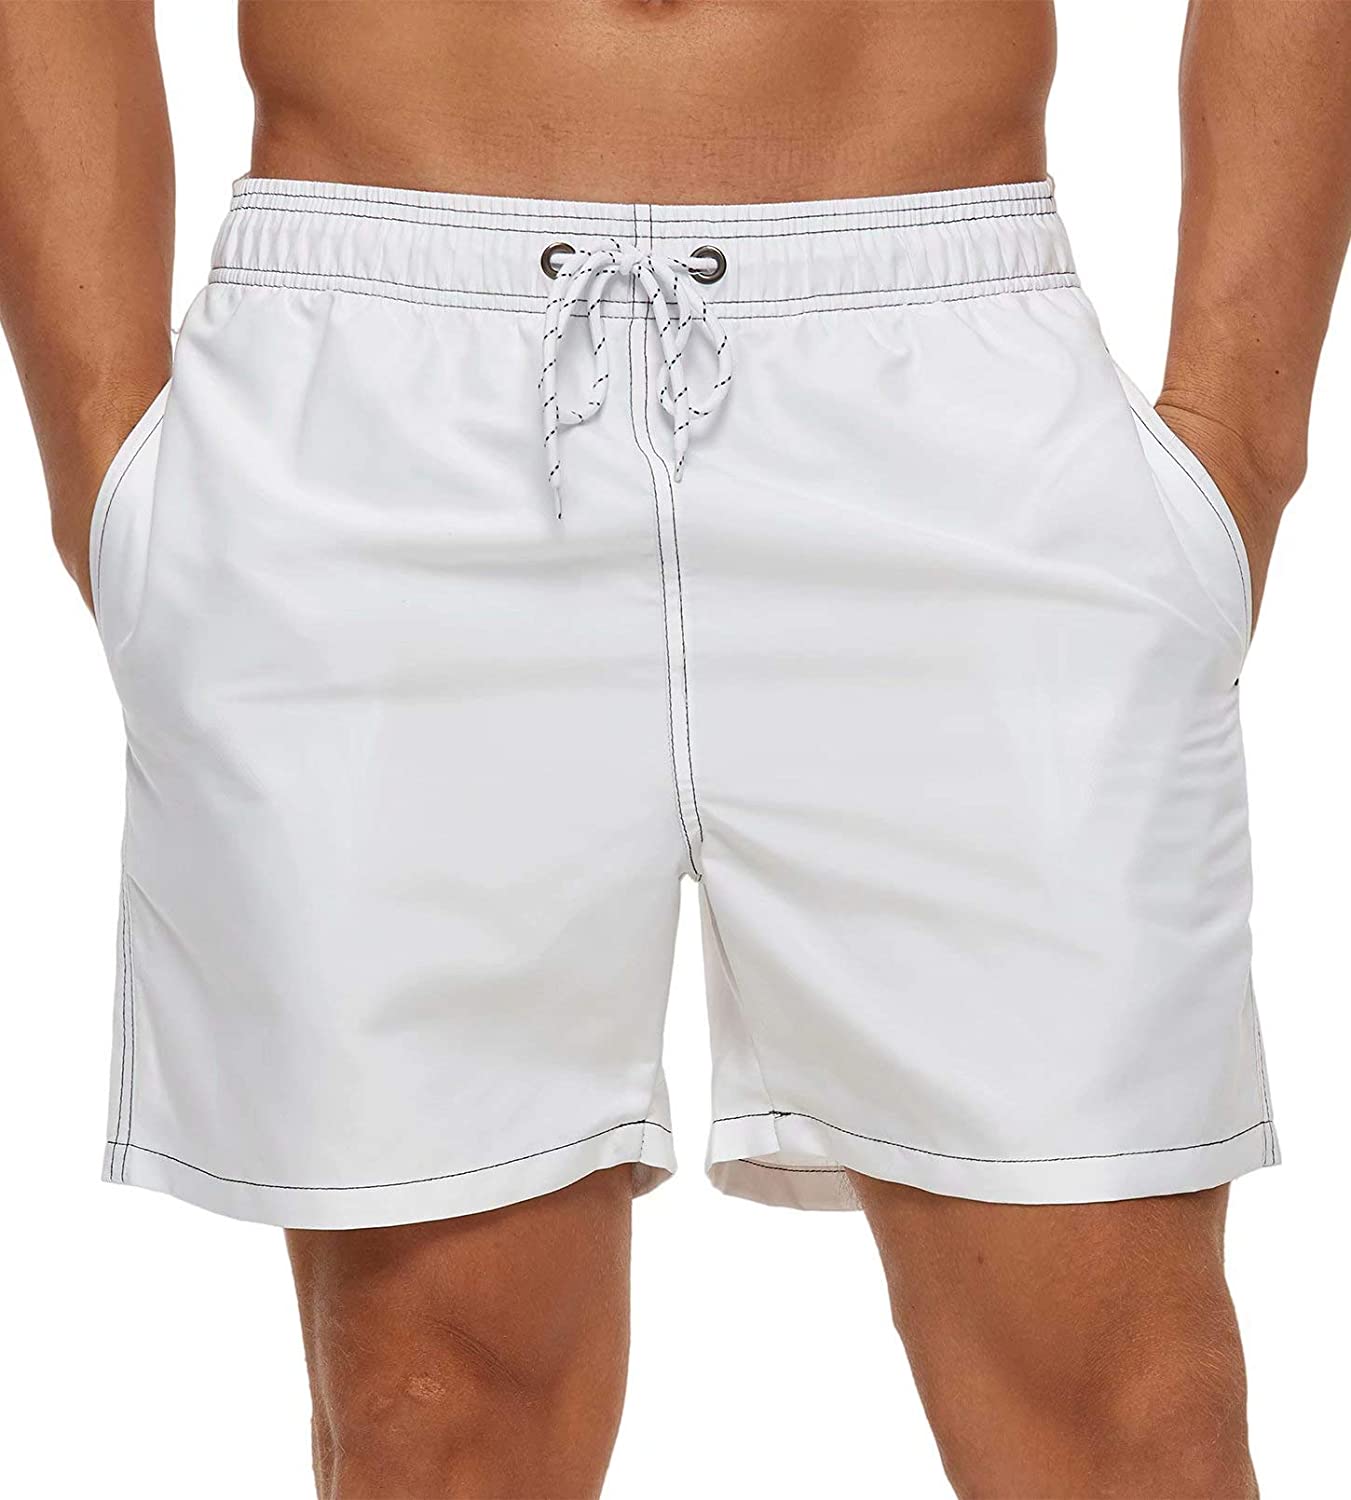 Tyhengta Mens Swim Trunks Quick Dry Beach Shorts with Zipper Pockets and Mesh Lining 